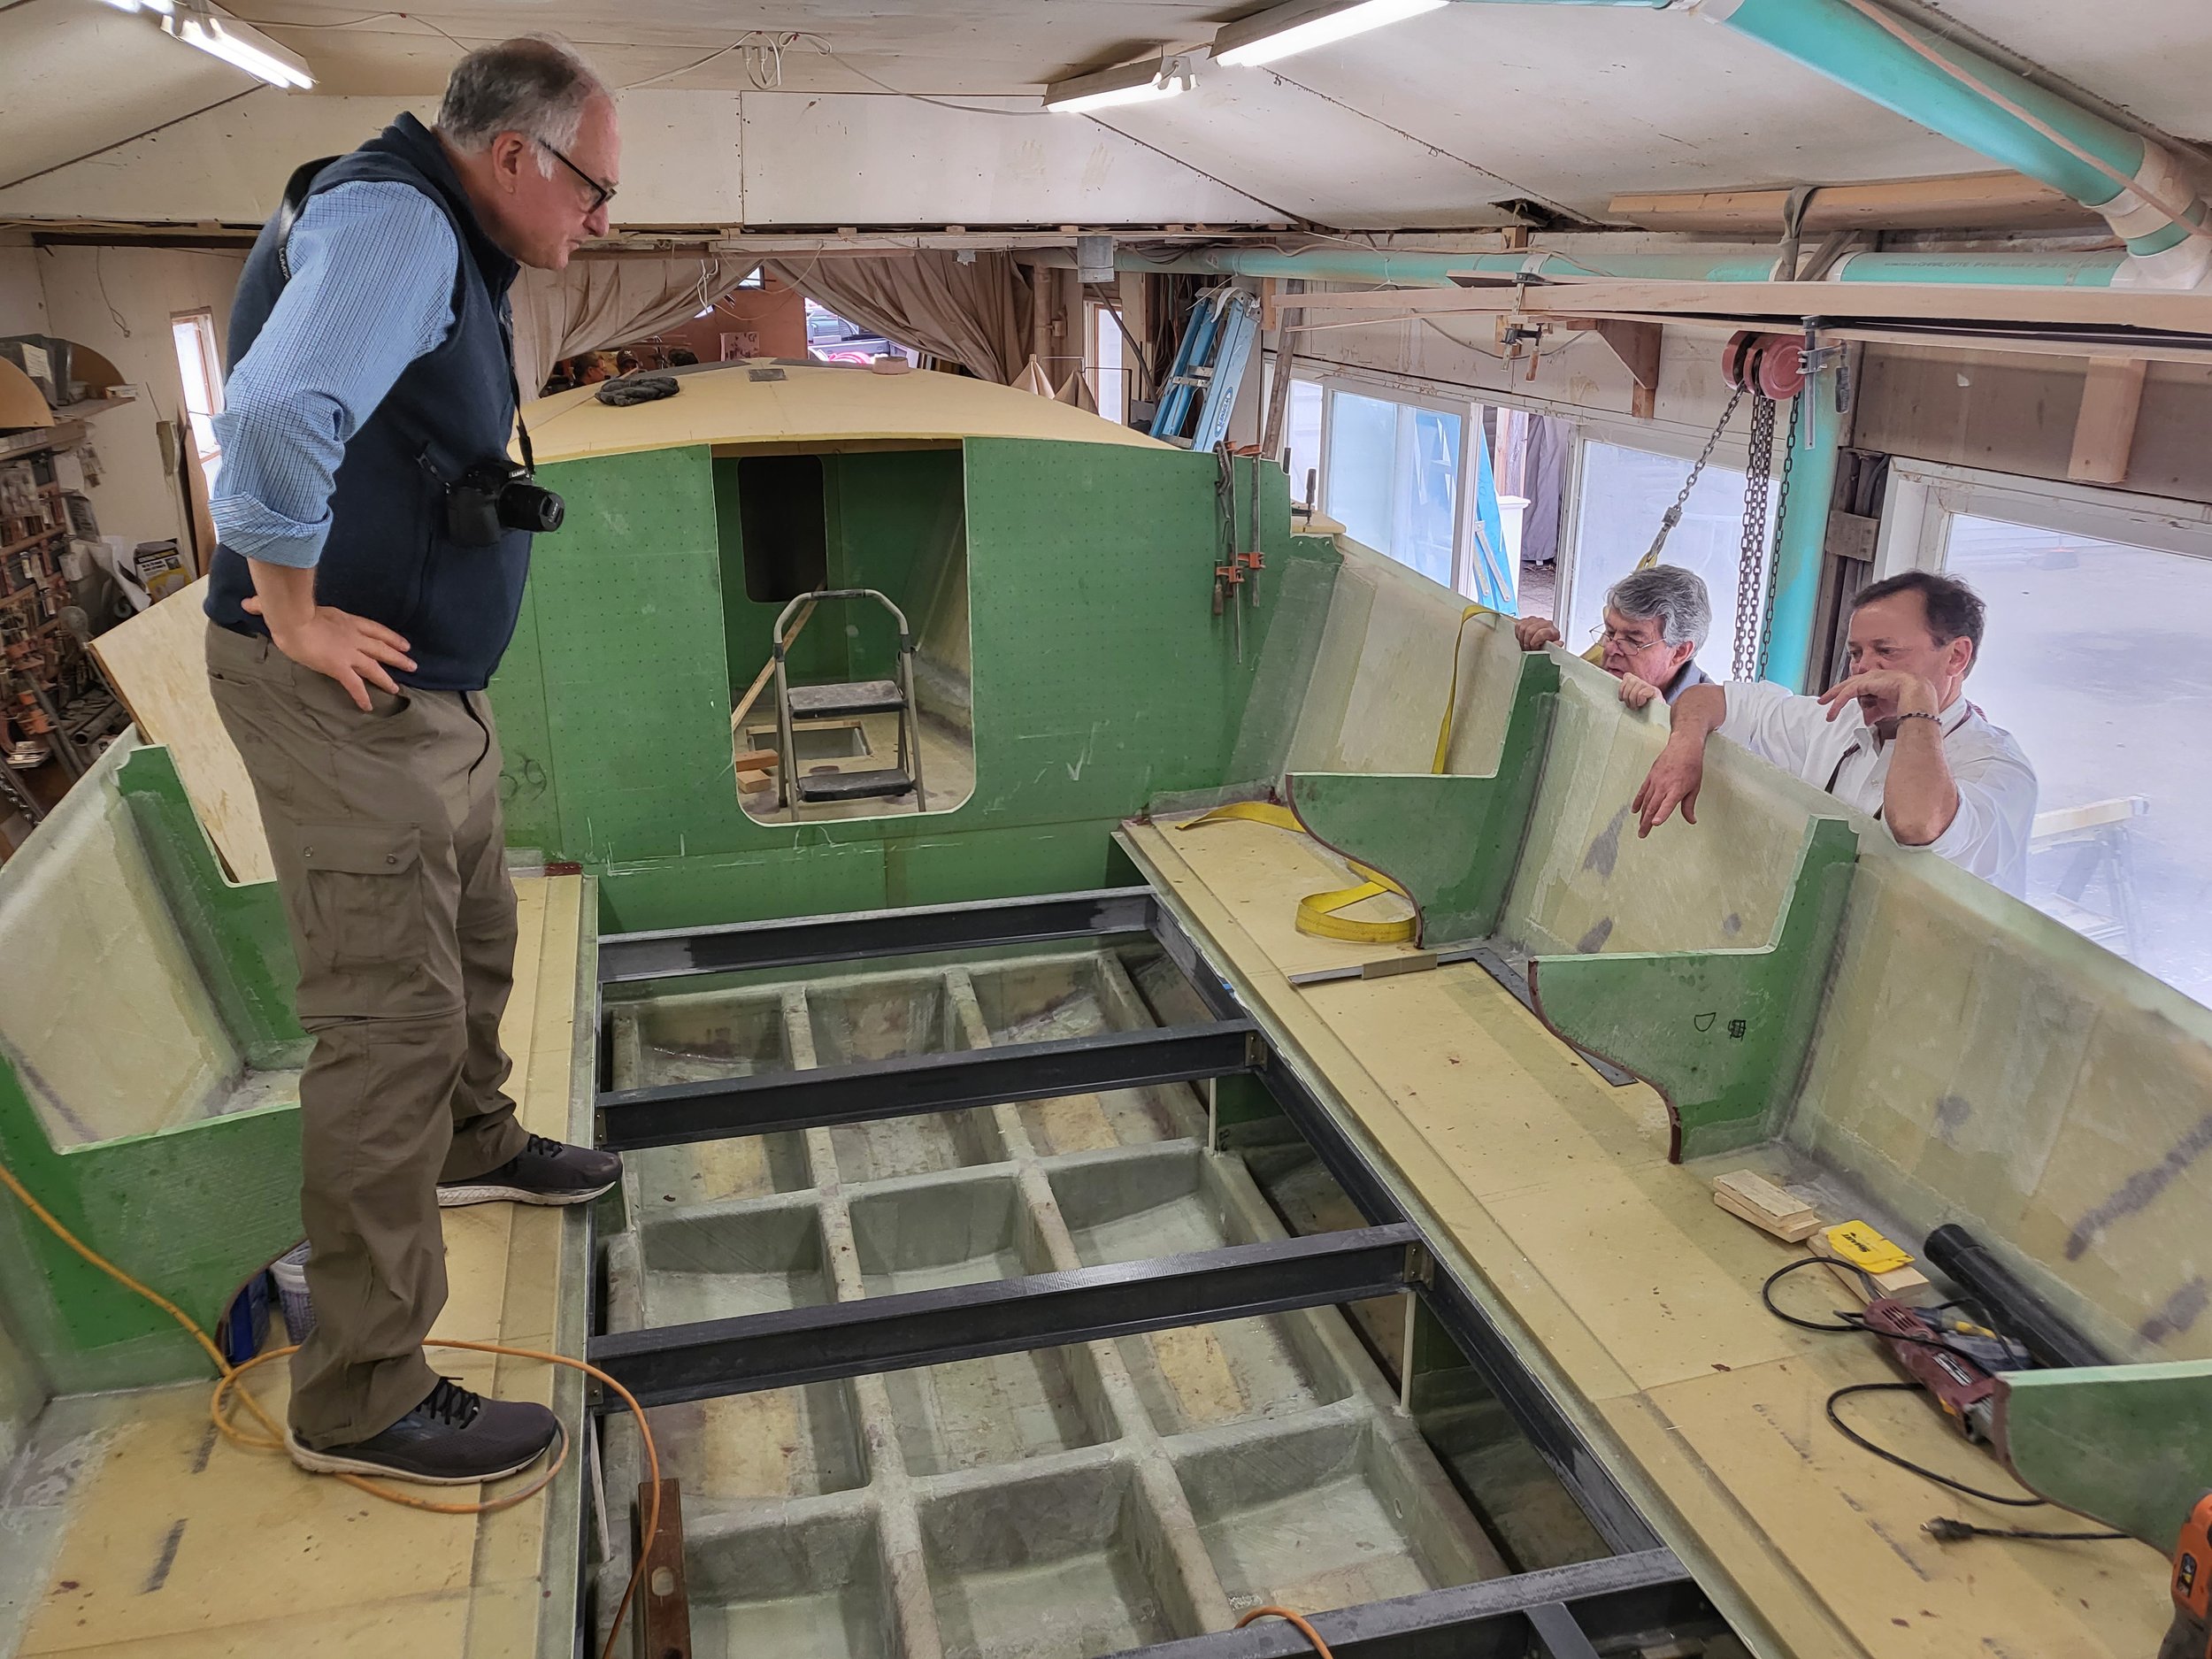    Neil Burns stands on the port (left) side of the future cabin deck straddling a passenger bench support while discussing things with Bruce Dyson and Doug Zurn.&nbsp; Note the Corecell foredeck in place awaiting fiberglass, and the fiberglass I-bea